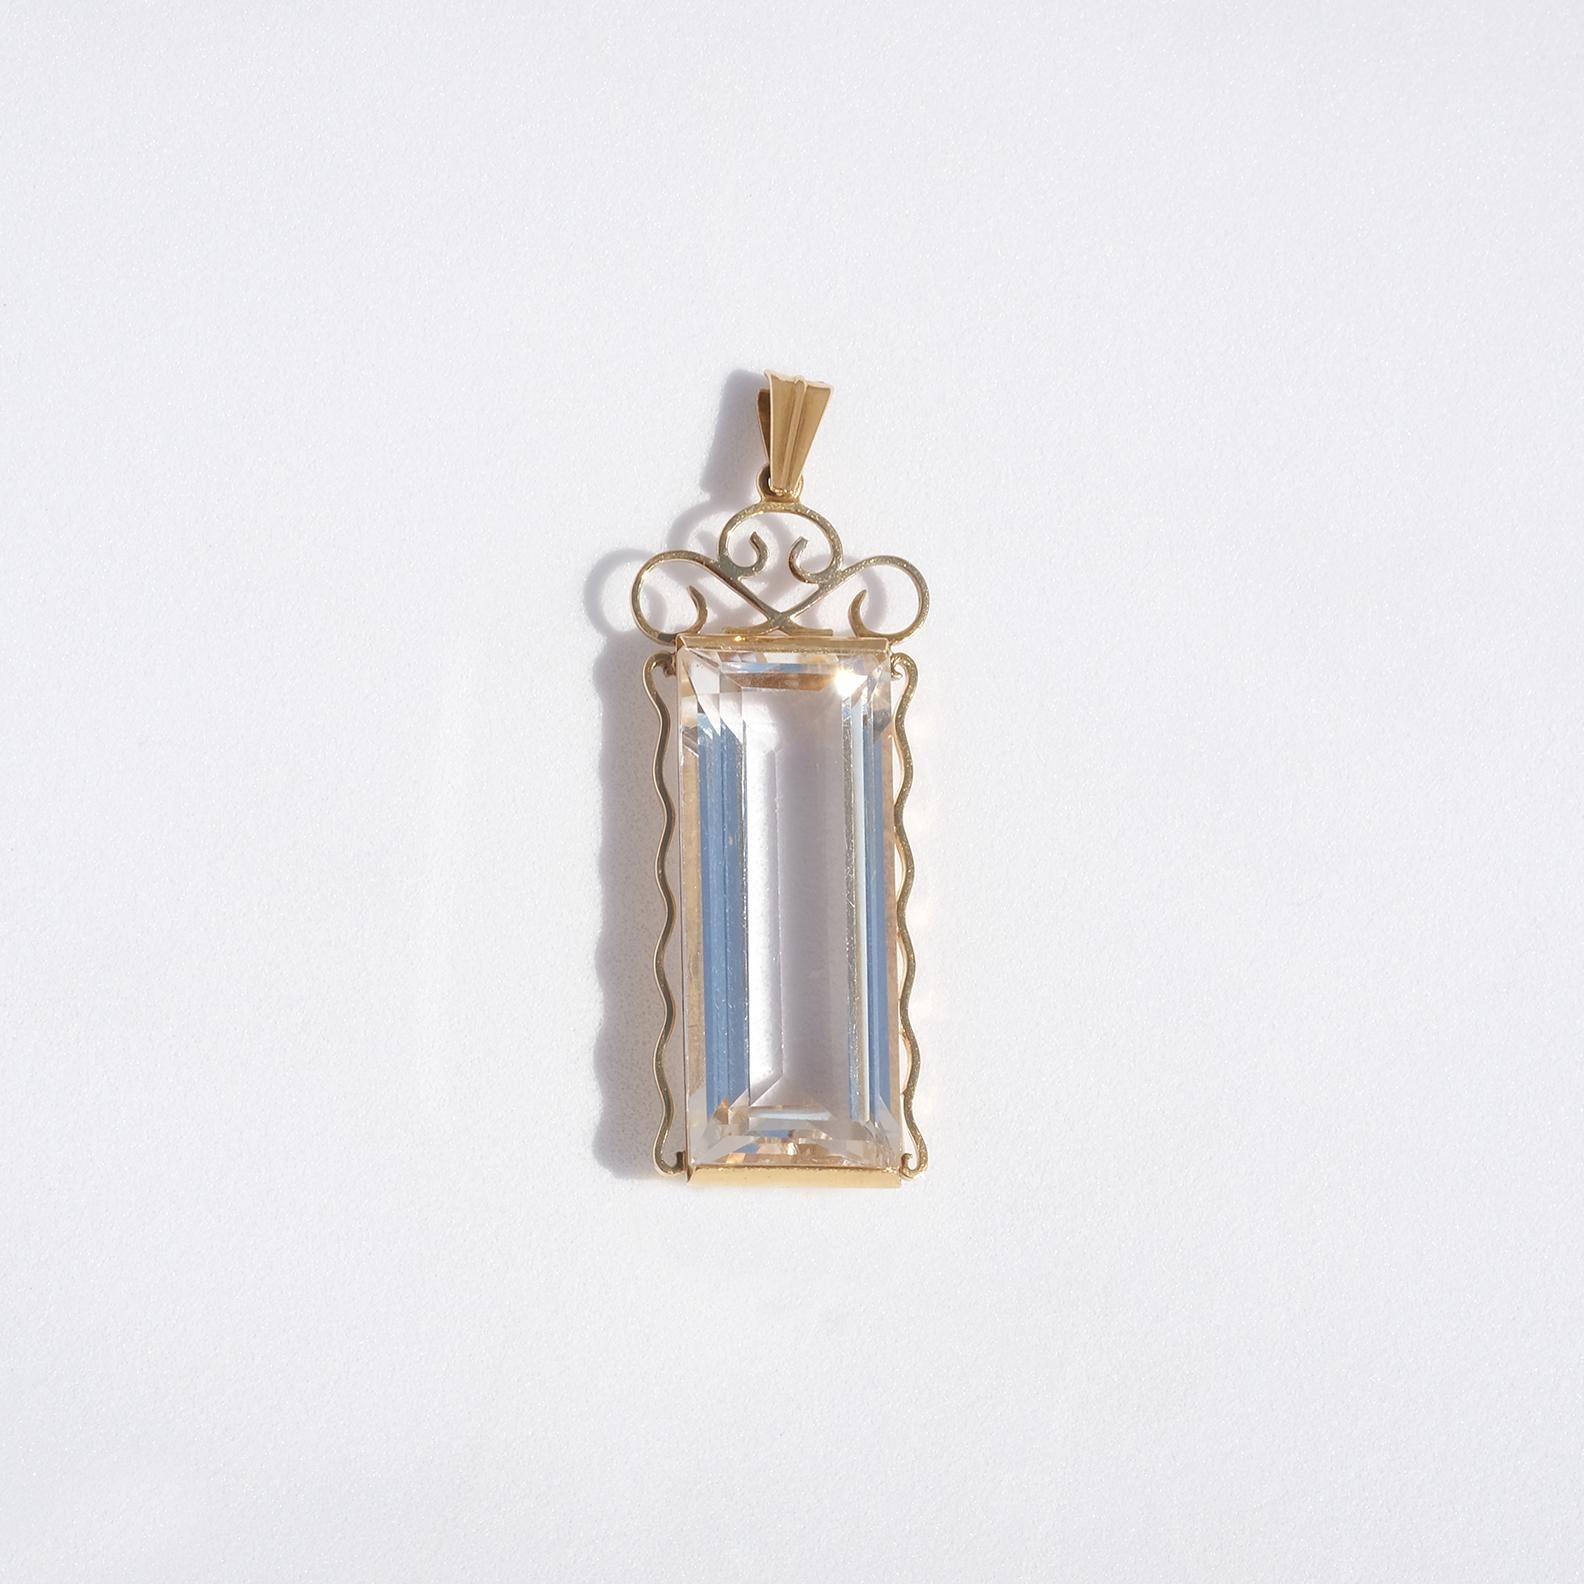 This exquisite pendant features an 18-karat gold setting that cradles a stunning faceted baguette rock crystal. The rock crystal is embraced by a beautiful design. The sides feature a delicate wavy pattern, enhancing the pendant's intricate